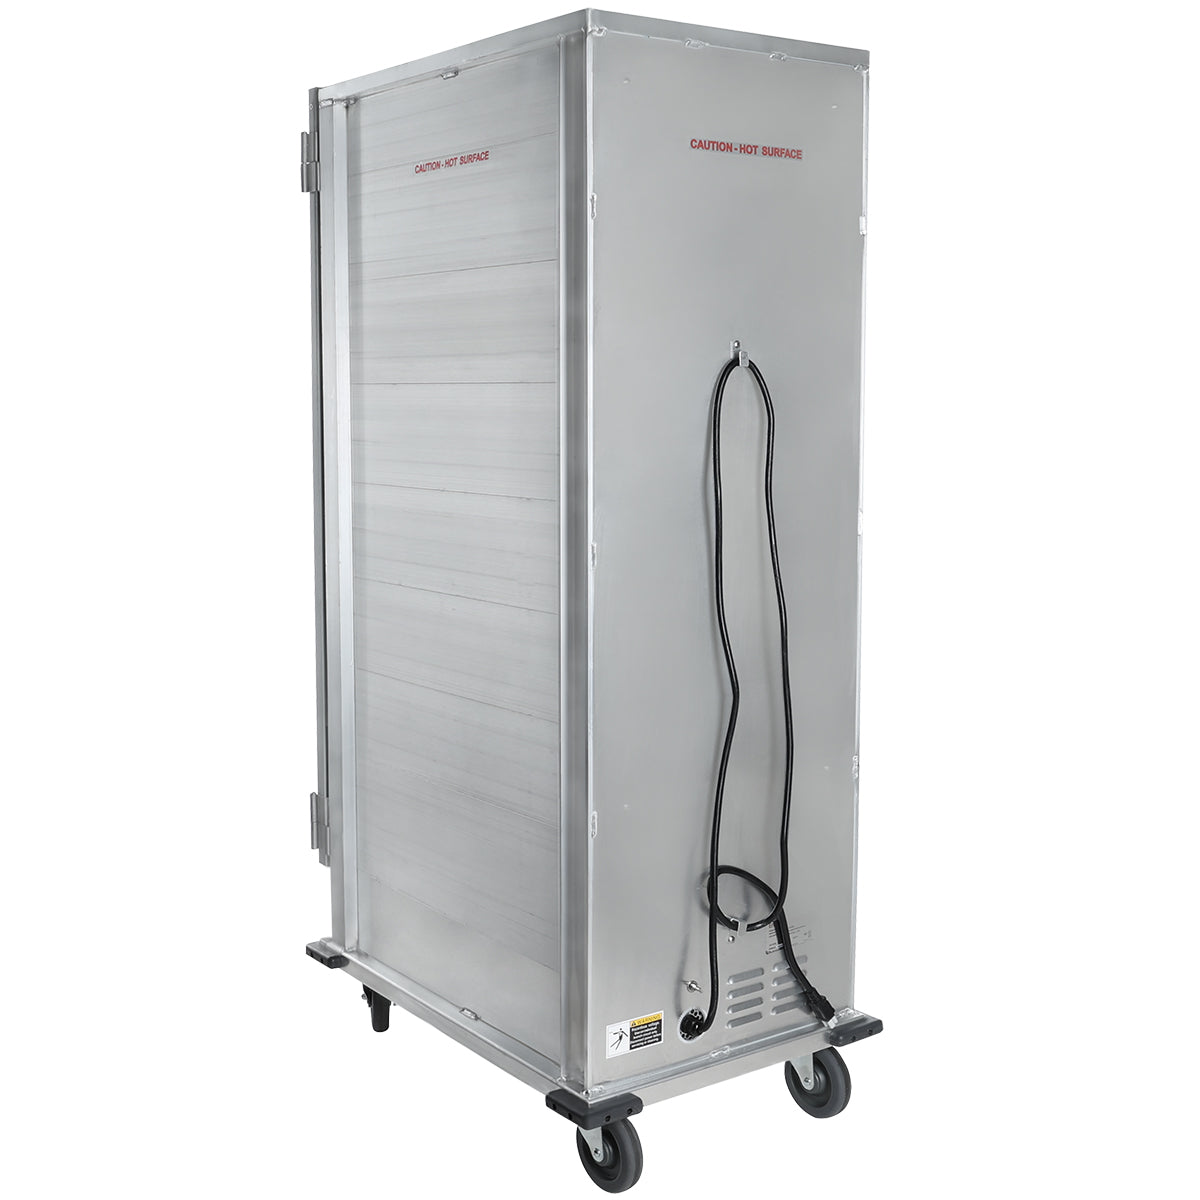 Empura E-H1836 Full-Height Non-Insulated Mobile Heavy-Duty Anodized Aluminum Heated Holding Cabinet With 1 Clear Polycarbonate Door